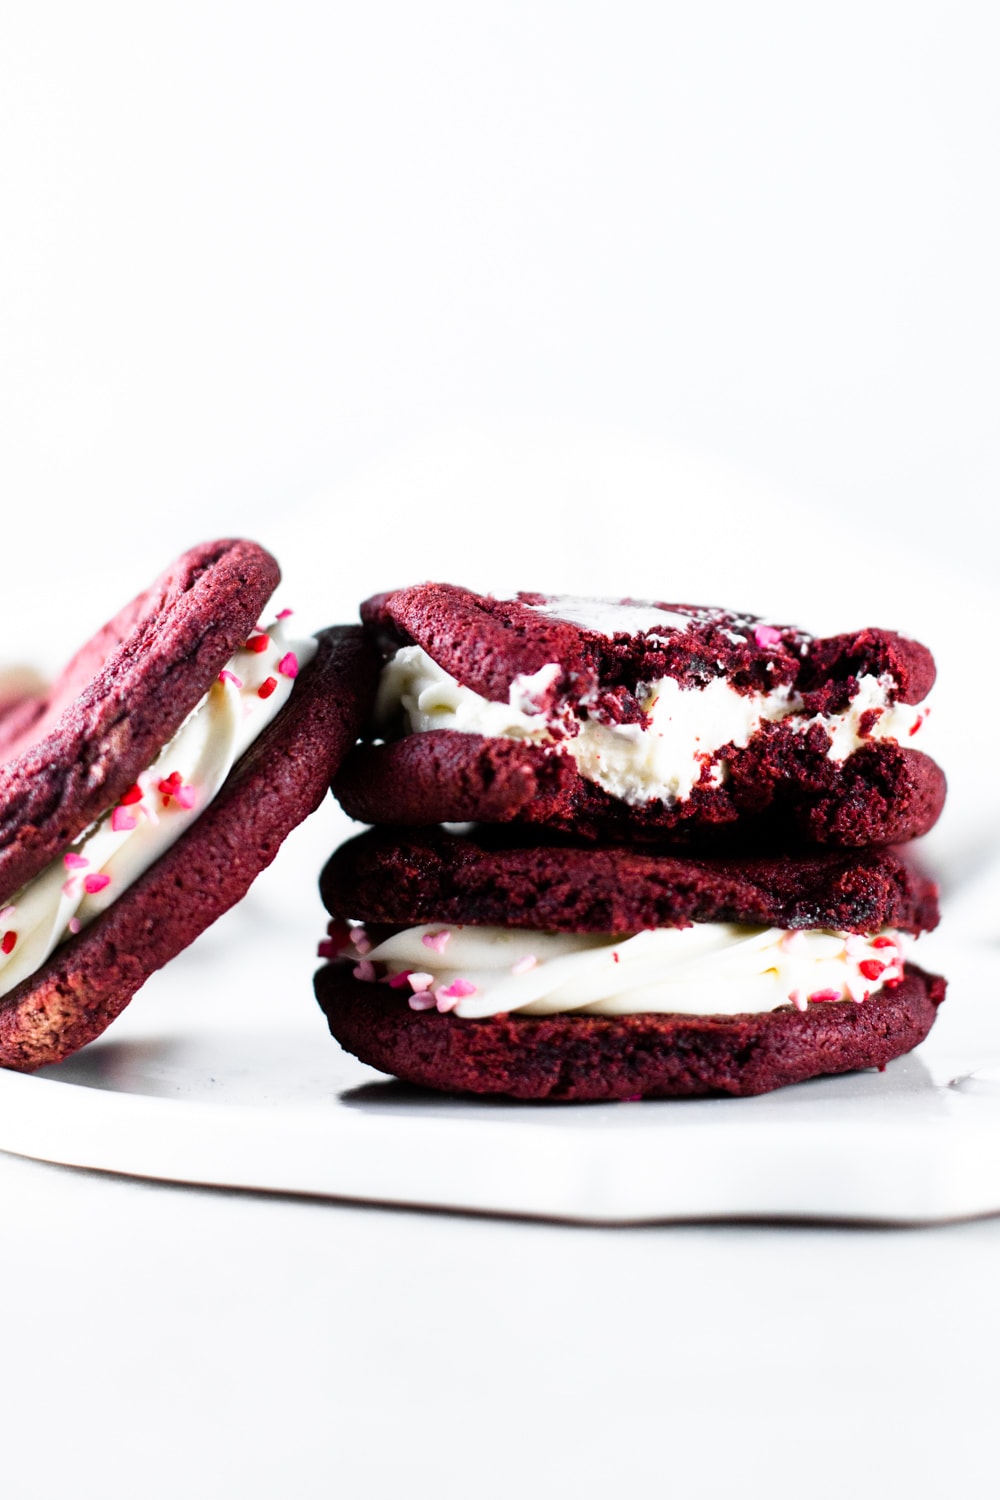 Delicious and chewy Vegan Red Velvet Cookies sandwiched with a yummy Cream Cheese Frosting. Think Red Velvet Cake, but in a convenient cookie form! #redvelvet #cookies #veganredvelvet #vegancookies #cheesecake #creamcheese #icing #dairyfree #eggless #cake #simple #easy #baking